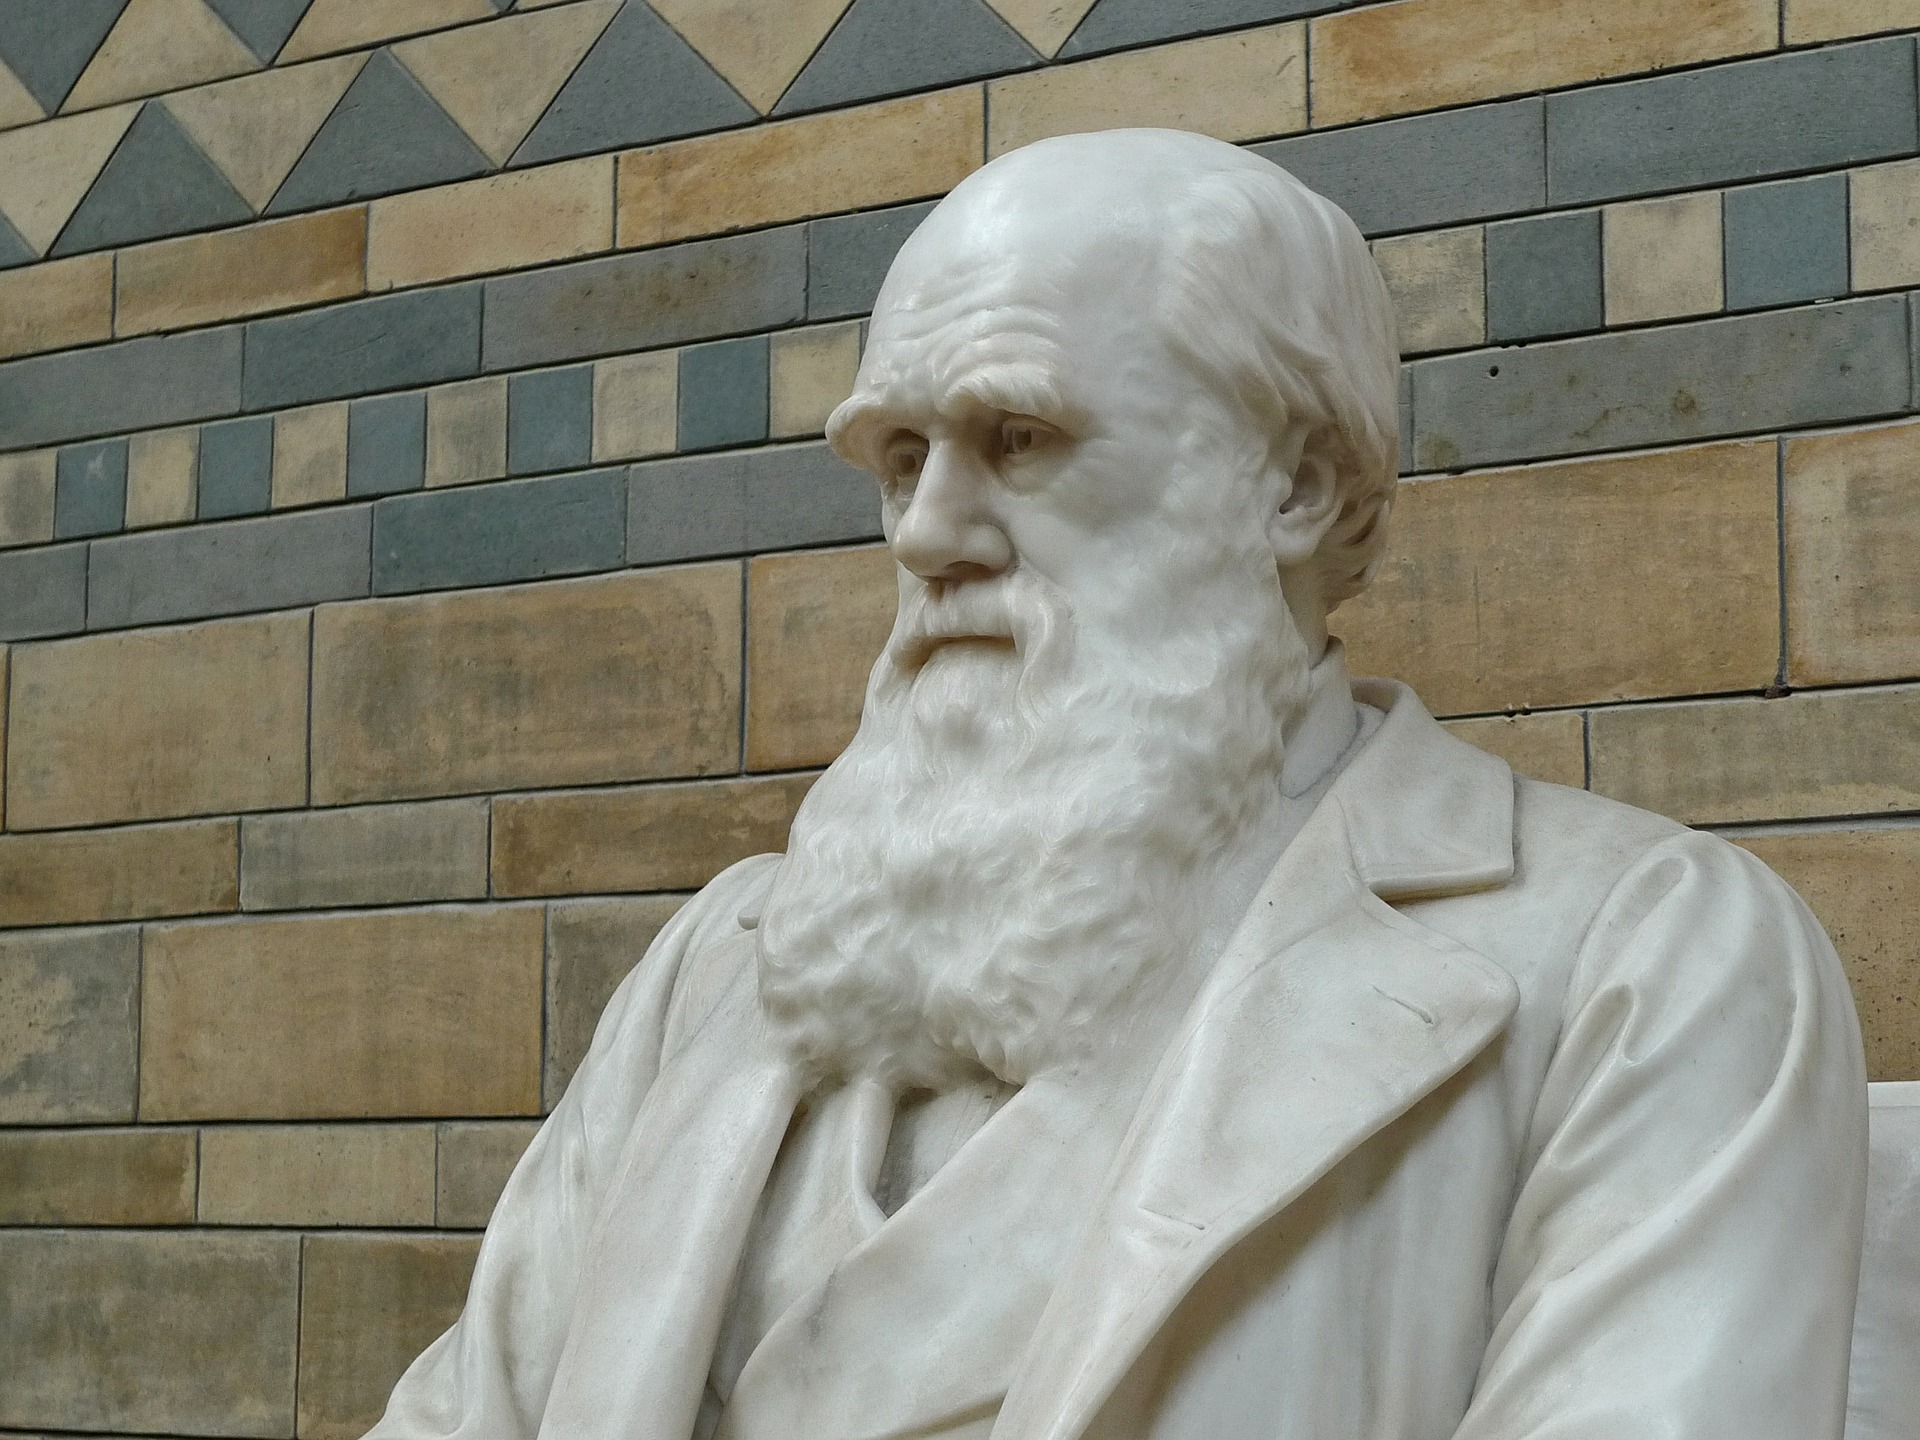 Are “All Men Created Equal” after Darwin? Part I